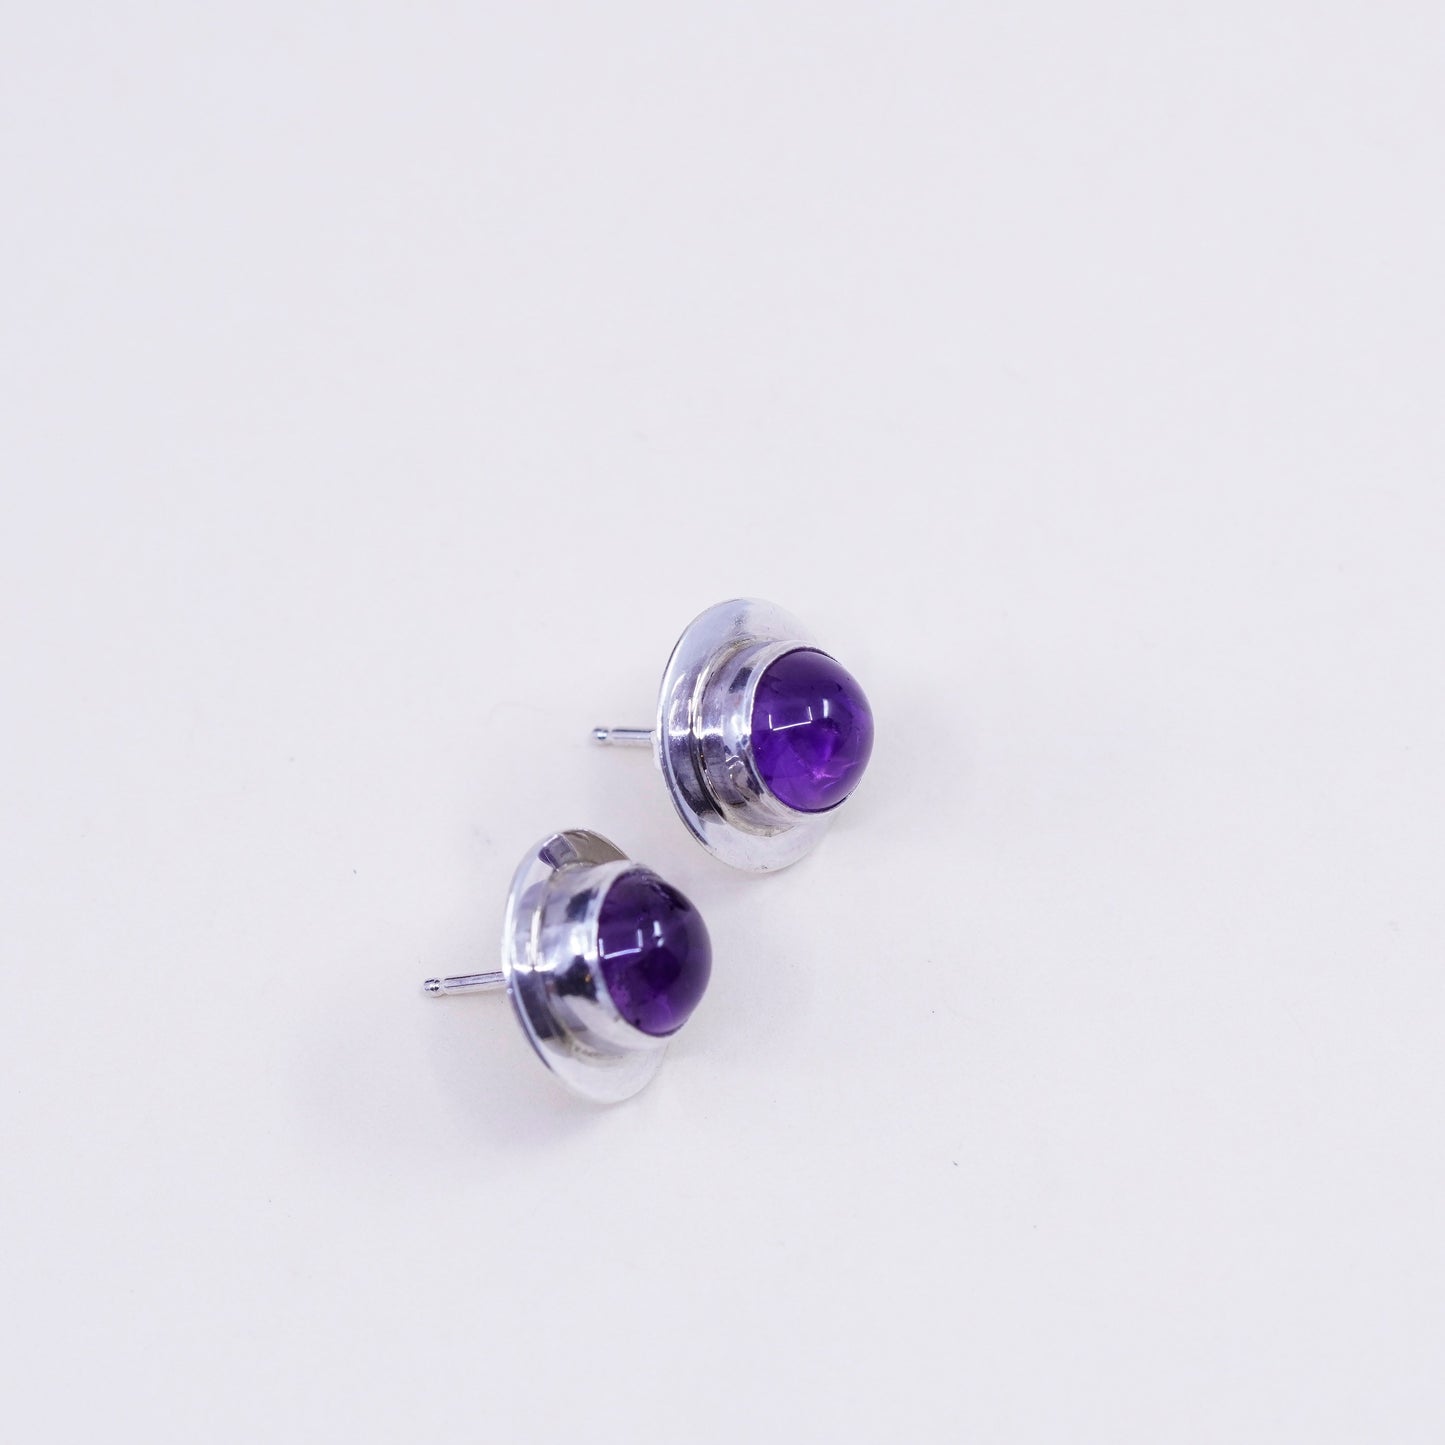 Vintage sterling silver earrings, 925 studs with round amethyst